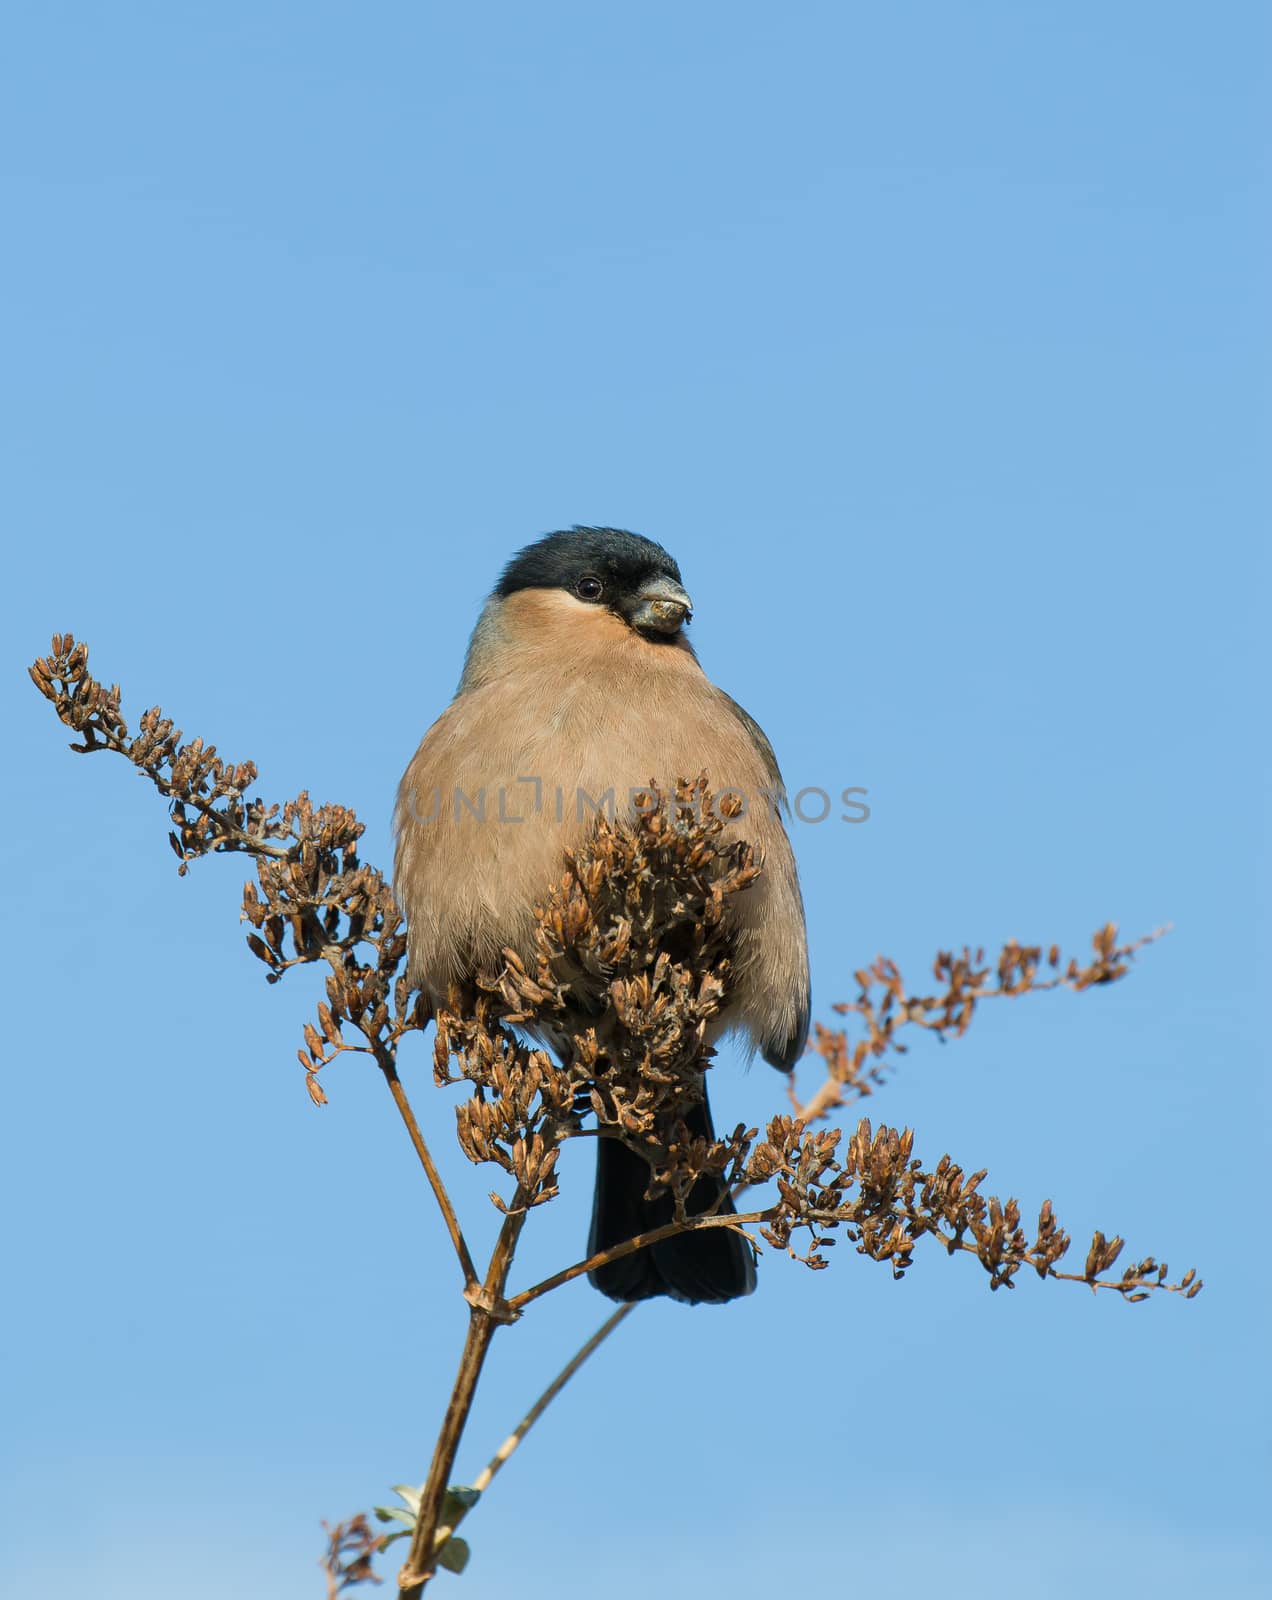 Female Bullfinch eating seeds from tree during winter.